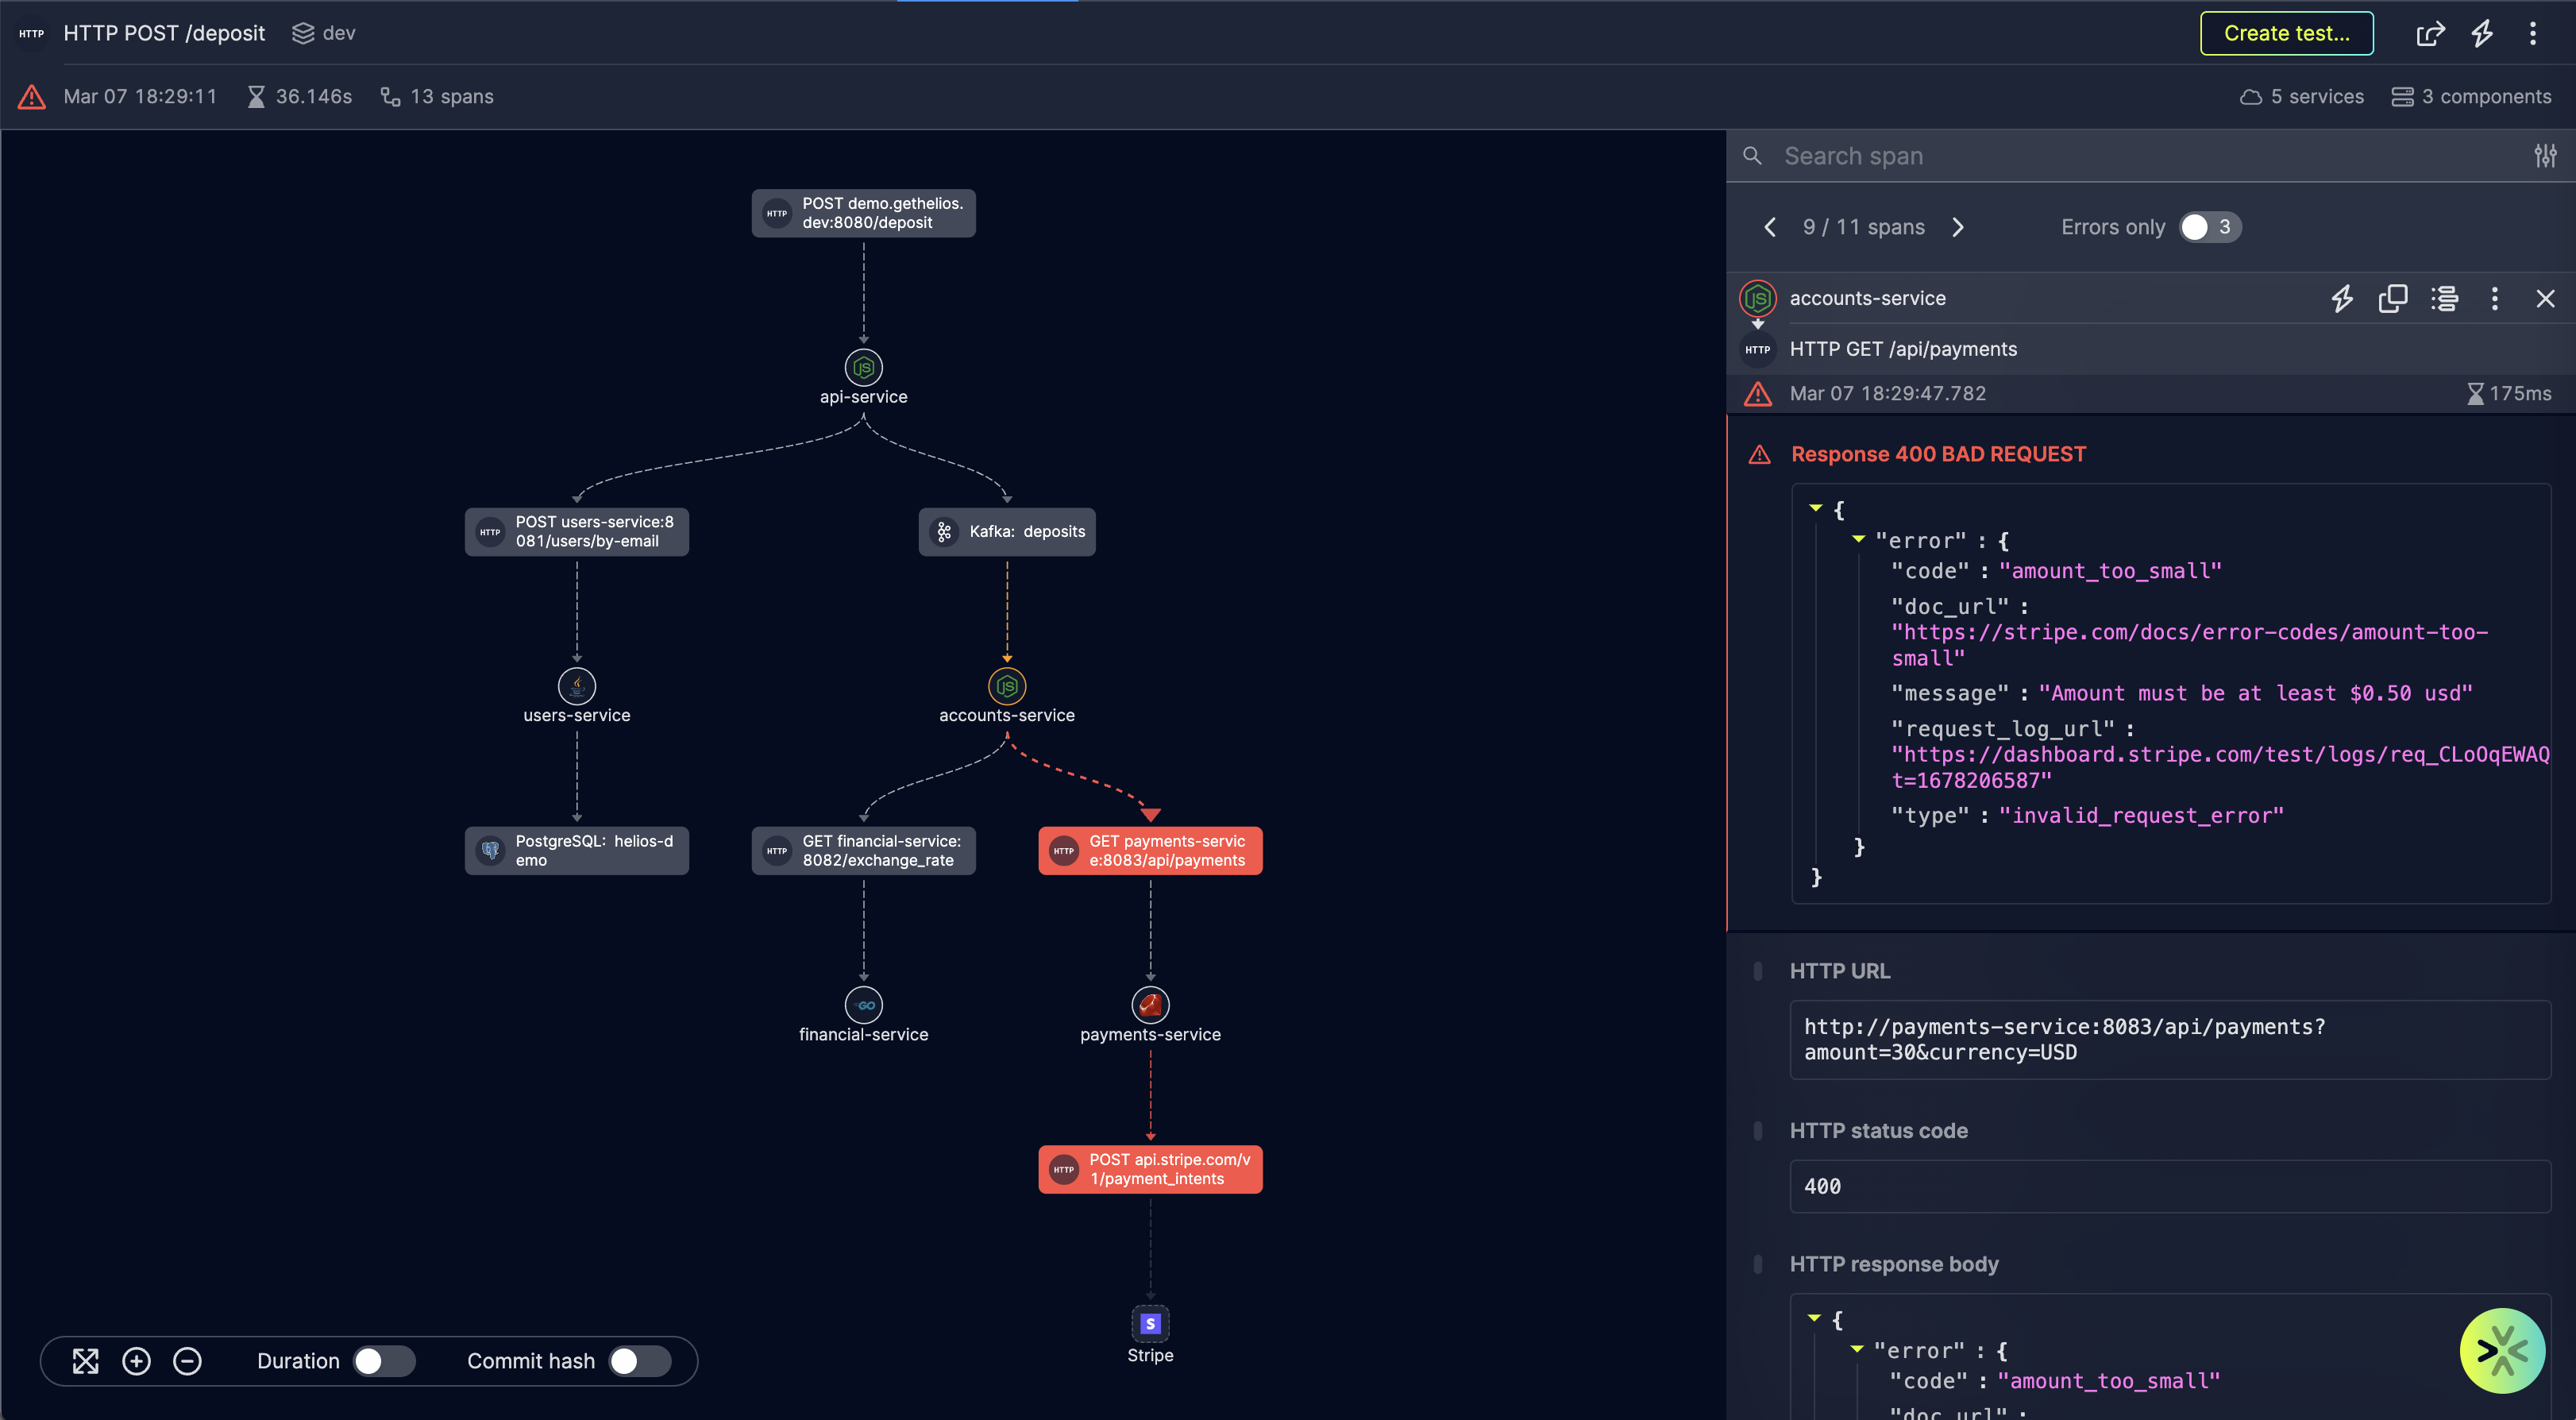 An example for an E2E trace for the POST /deposit application flow in the Helios Sandbox, demonstrating observability also including errors, fast troubleshooting, test generation and collaboration features.